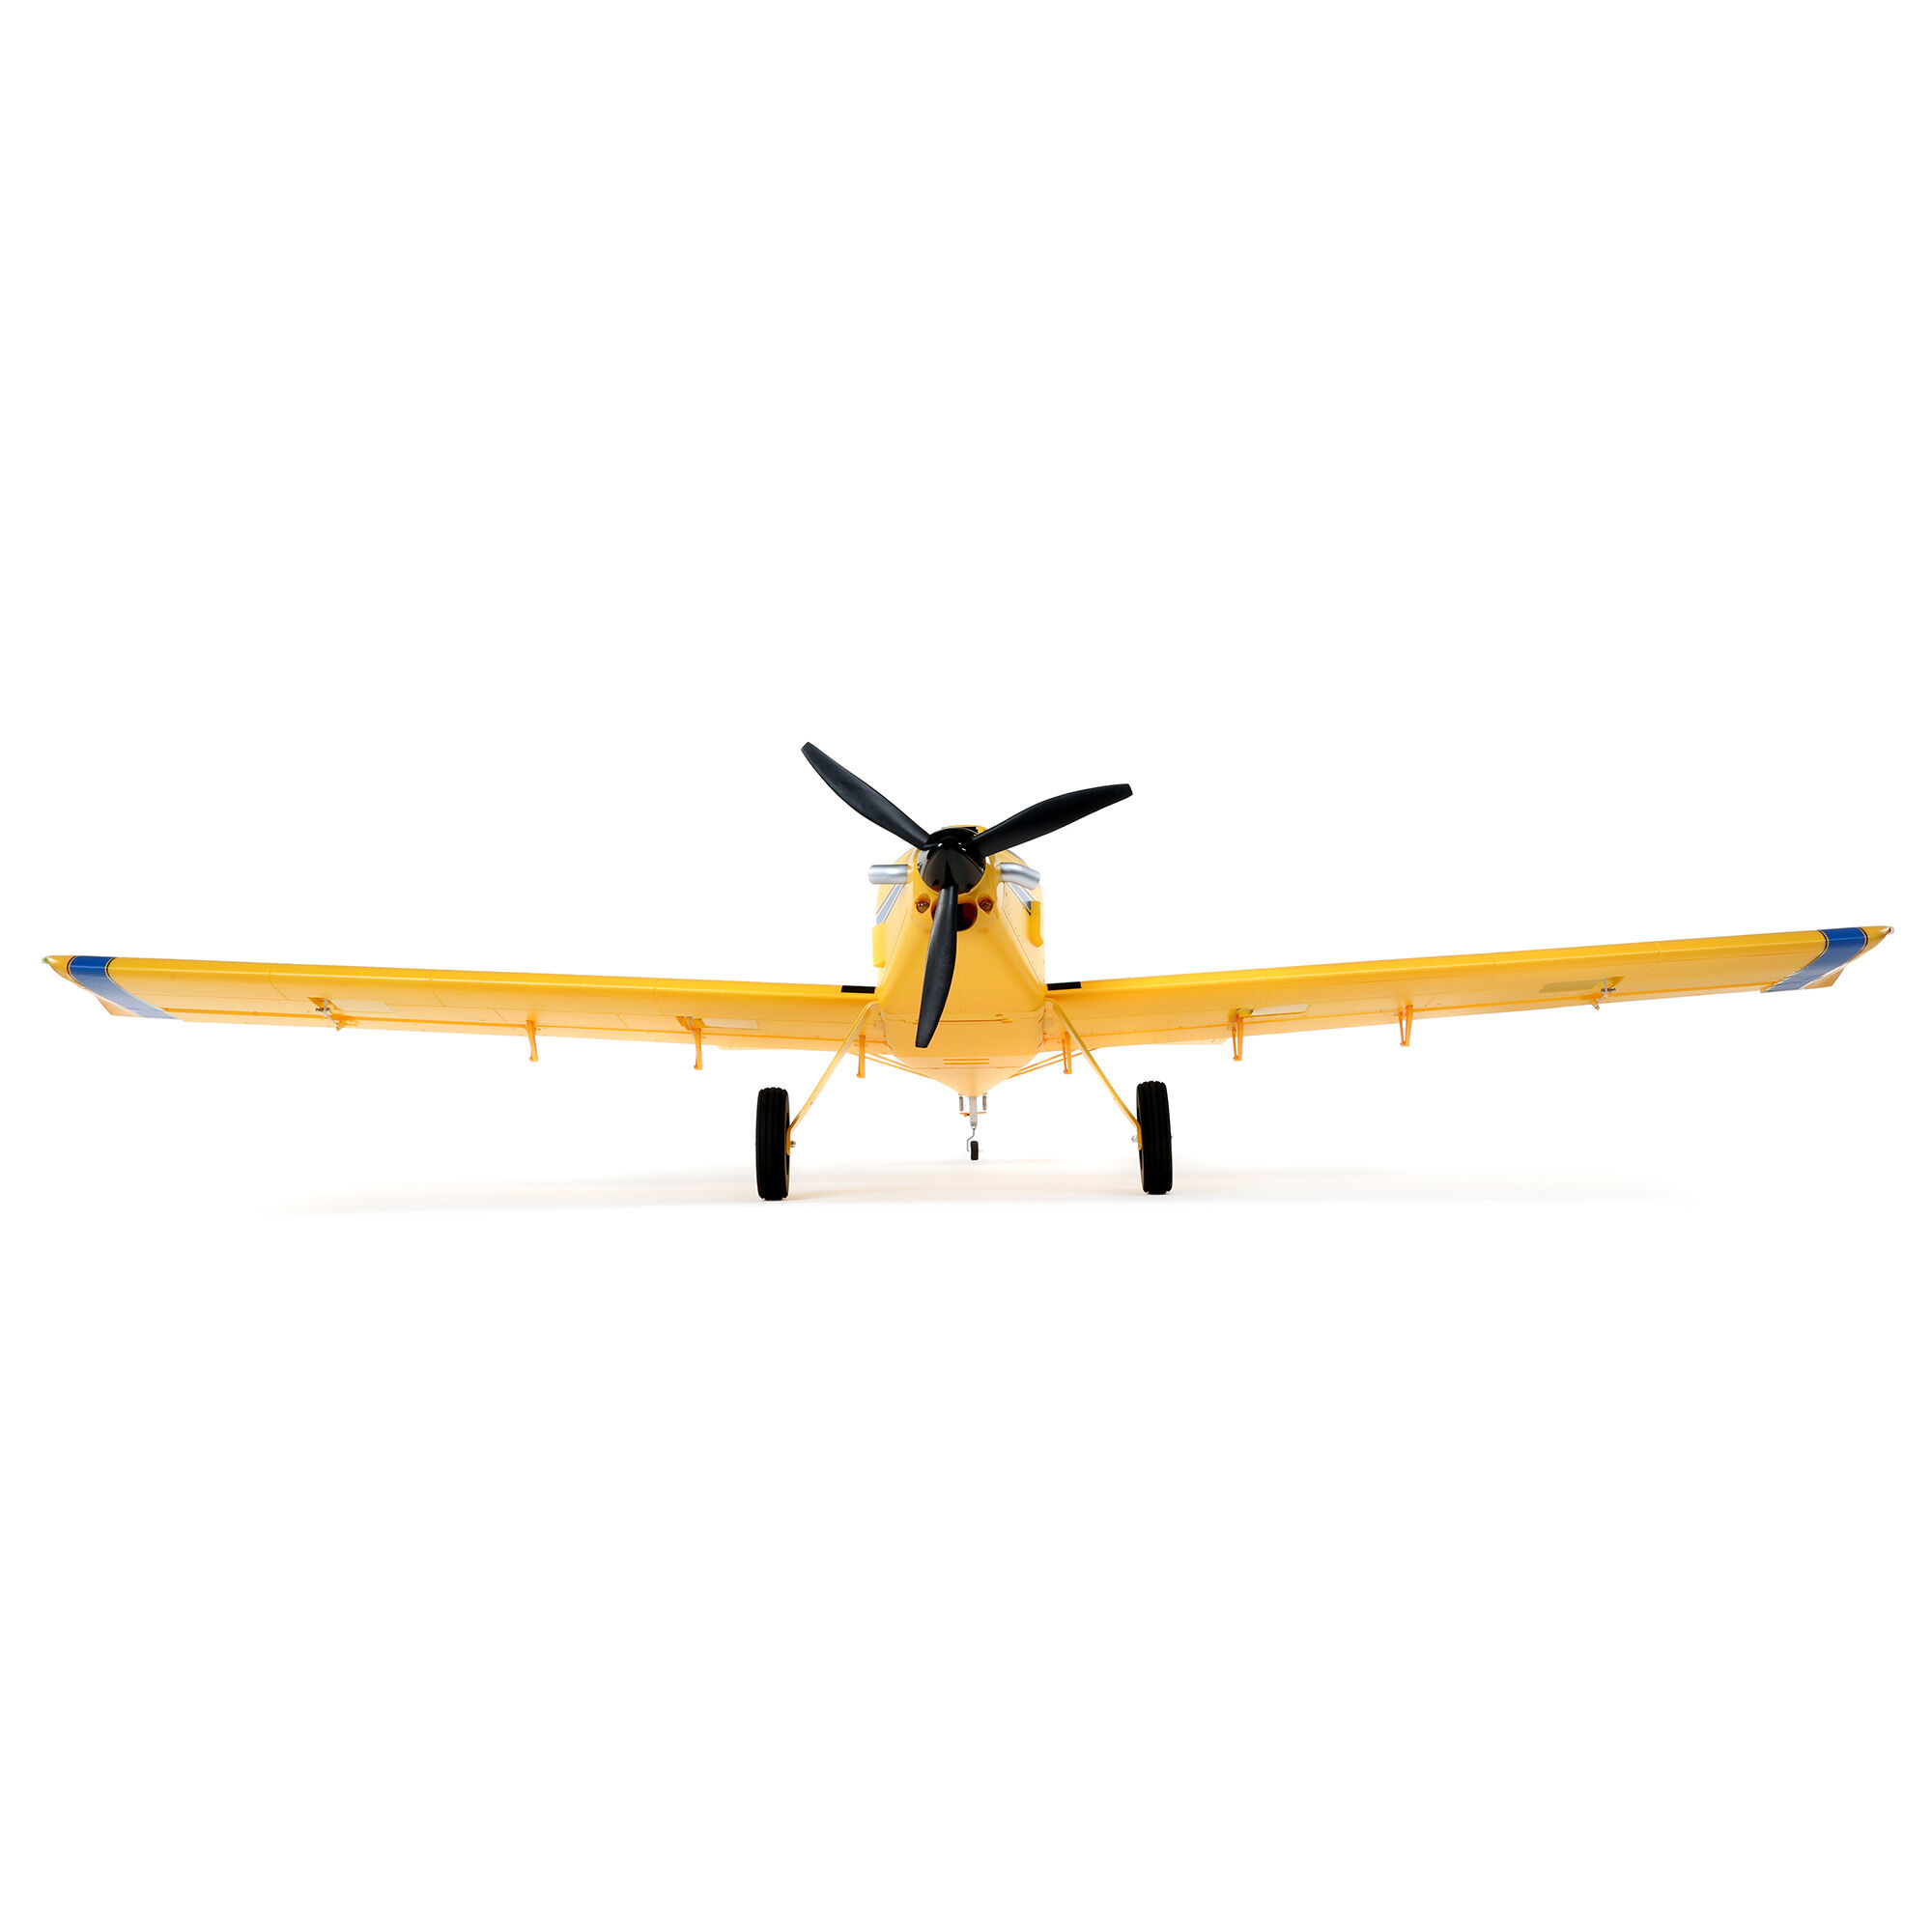 EFlite E-flite Air Tractor 1.5m RC PNP Plug In Play Electric Airplane EFL16475 